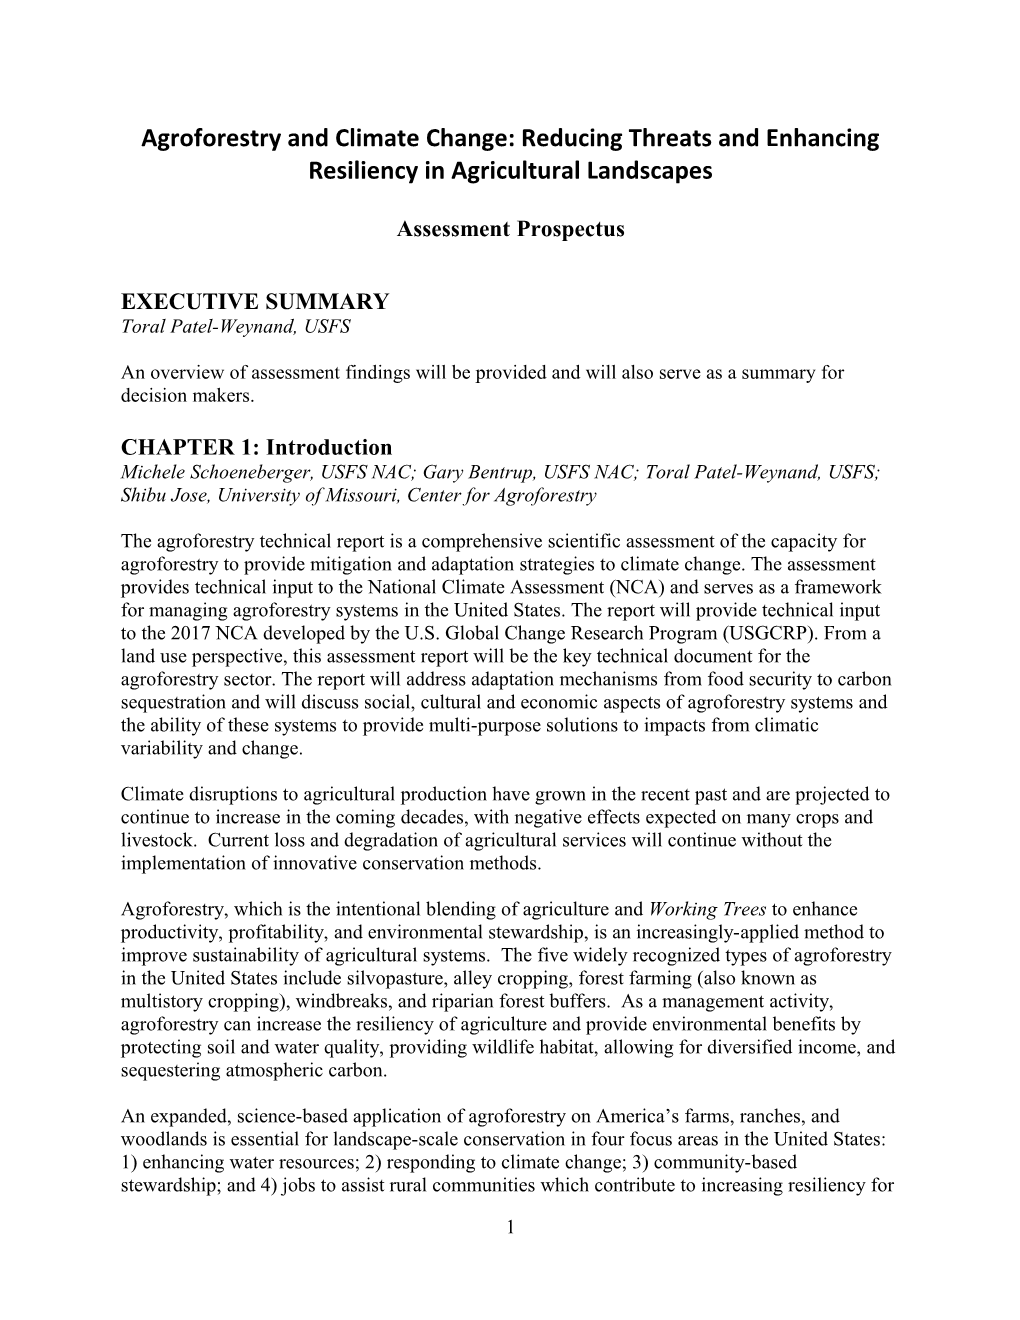 Agroforestry and Climate Change: Reducing Threats and Enhancing Resiliency in Agricultural